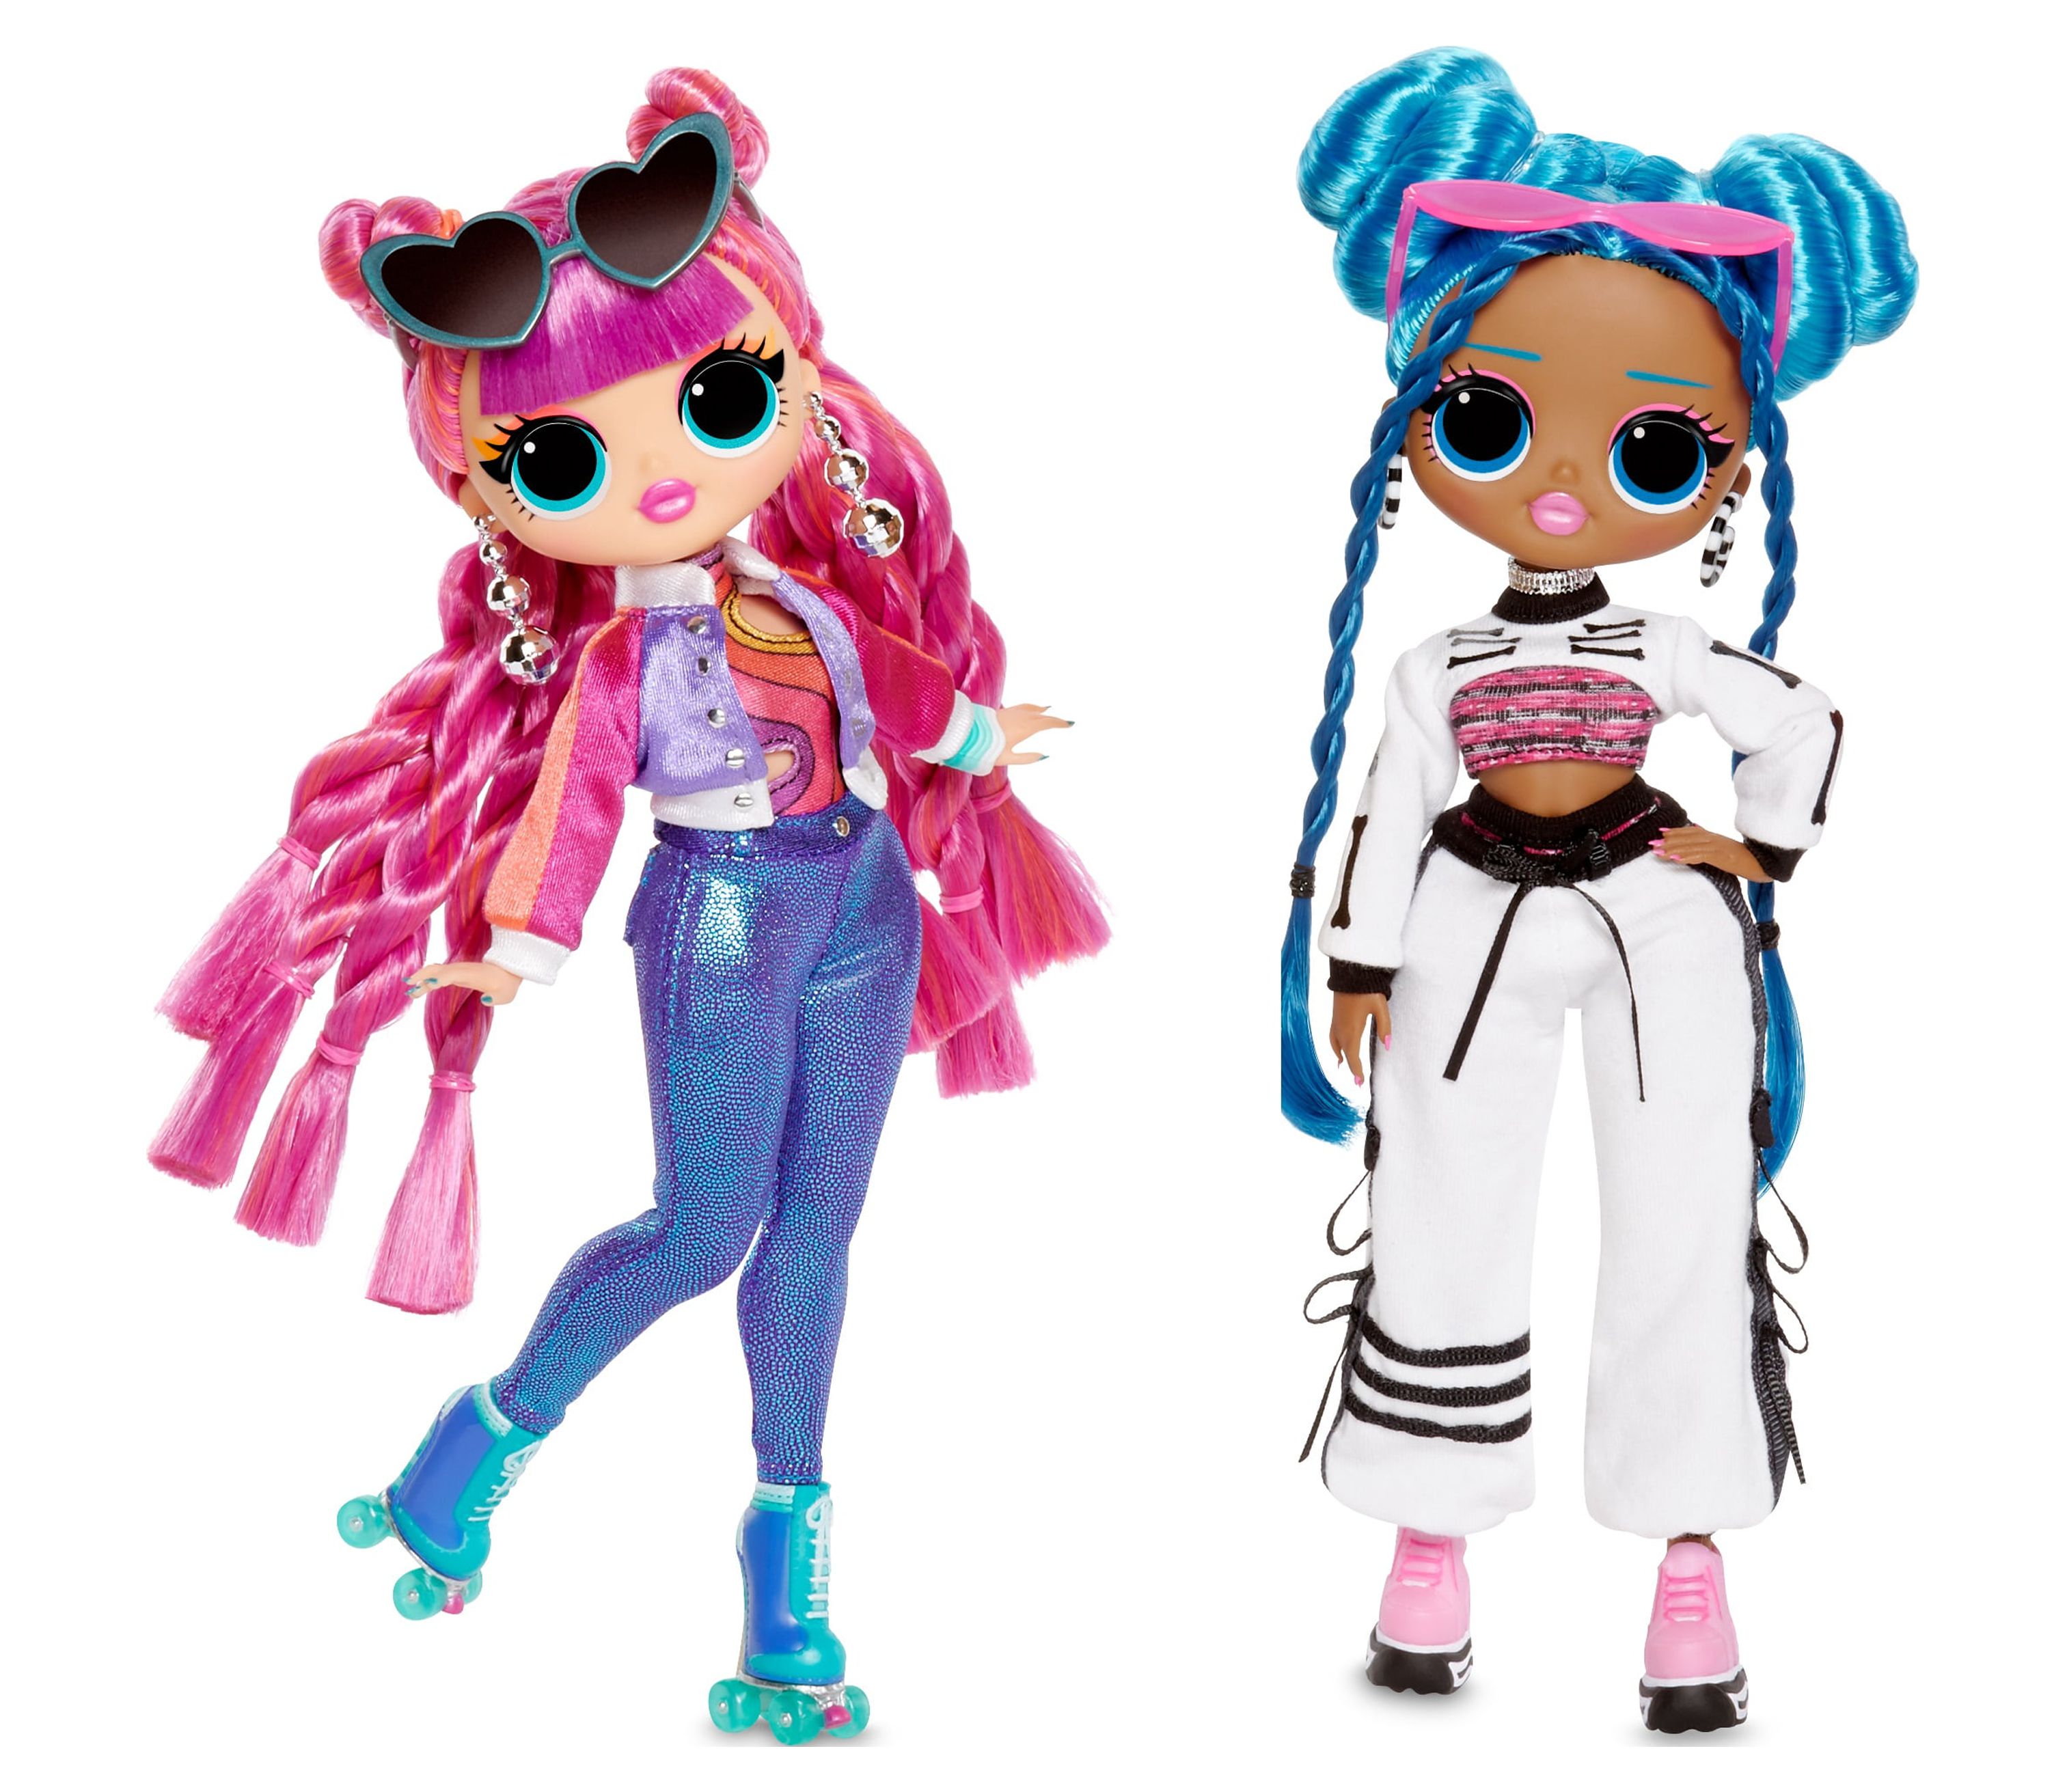 LOL Surprise OMG Fashion Doll 2-Pack Roller Chick And Chillax With 20 Surprises Each, Great Gift for Kids Ages 4 5 6+ - image 1 of 8